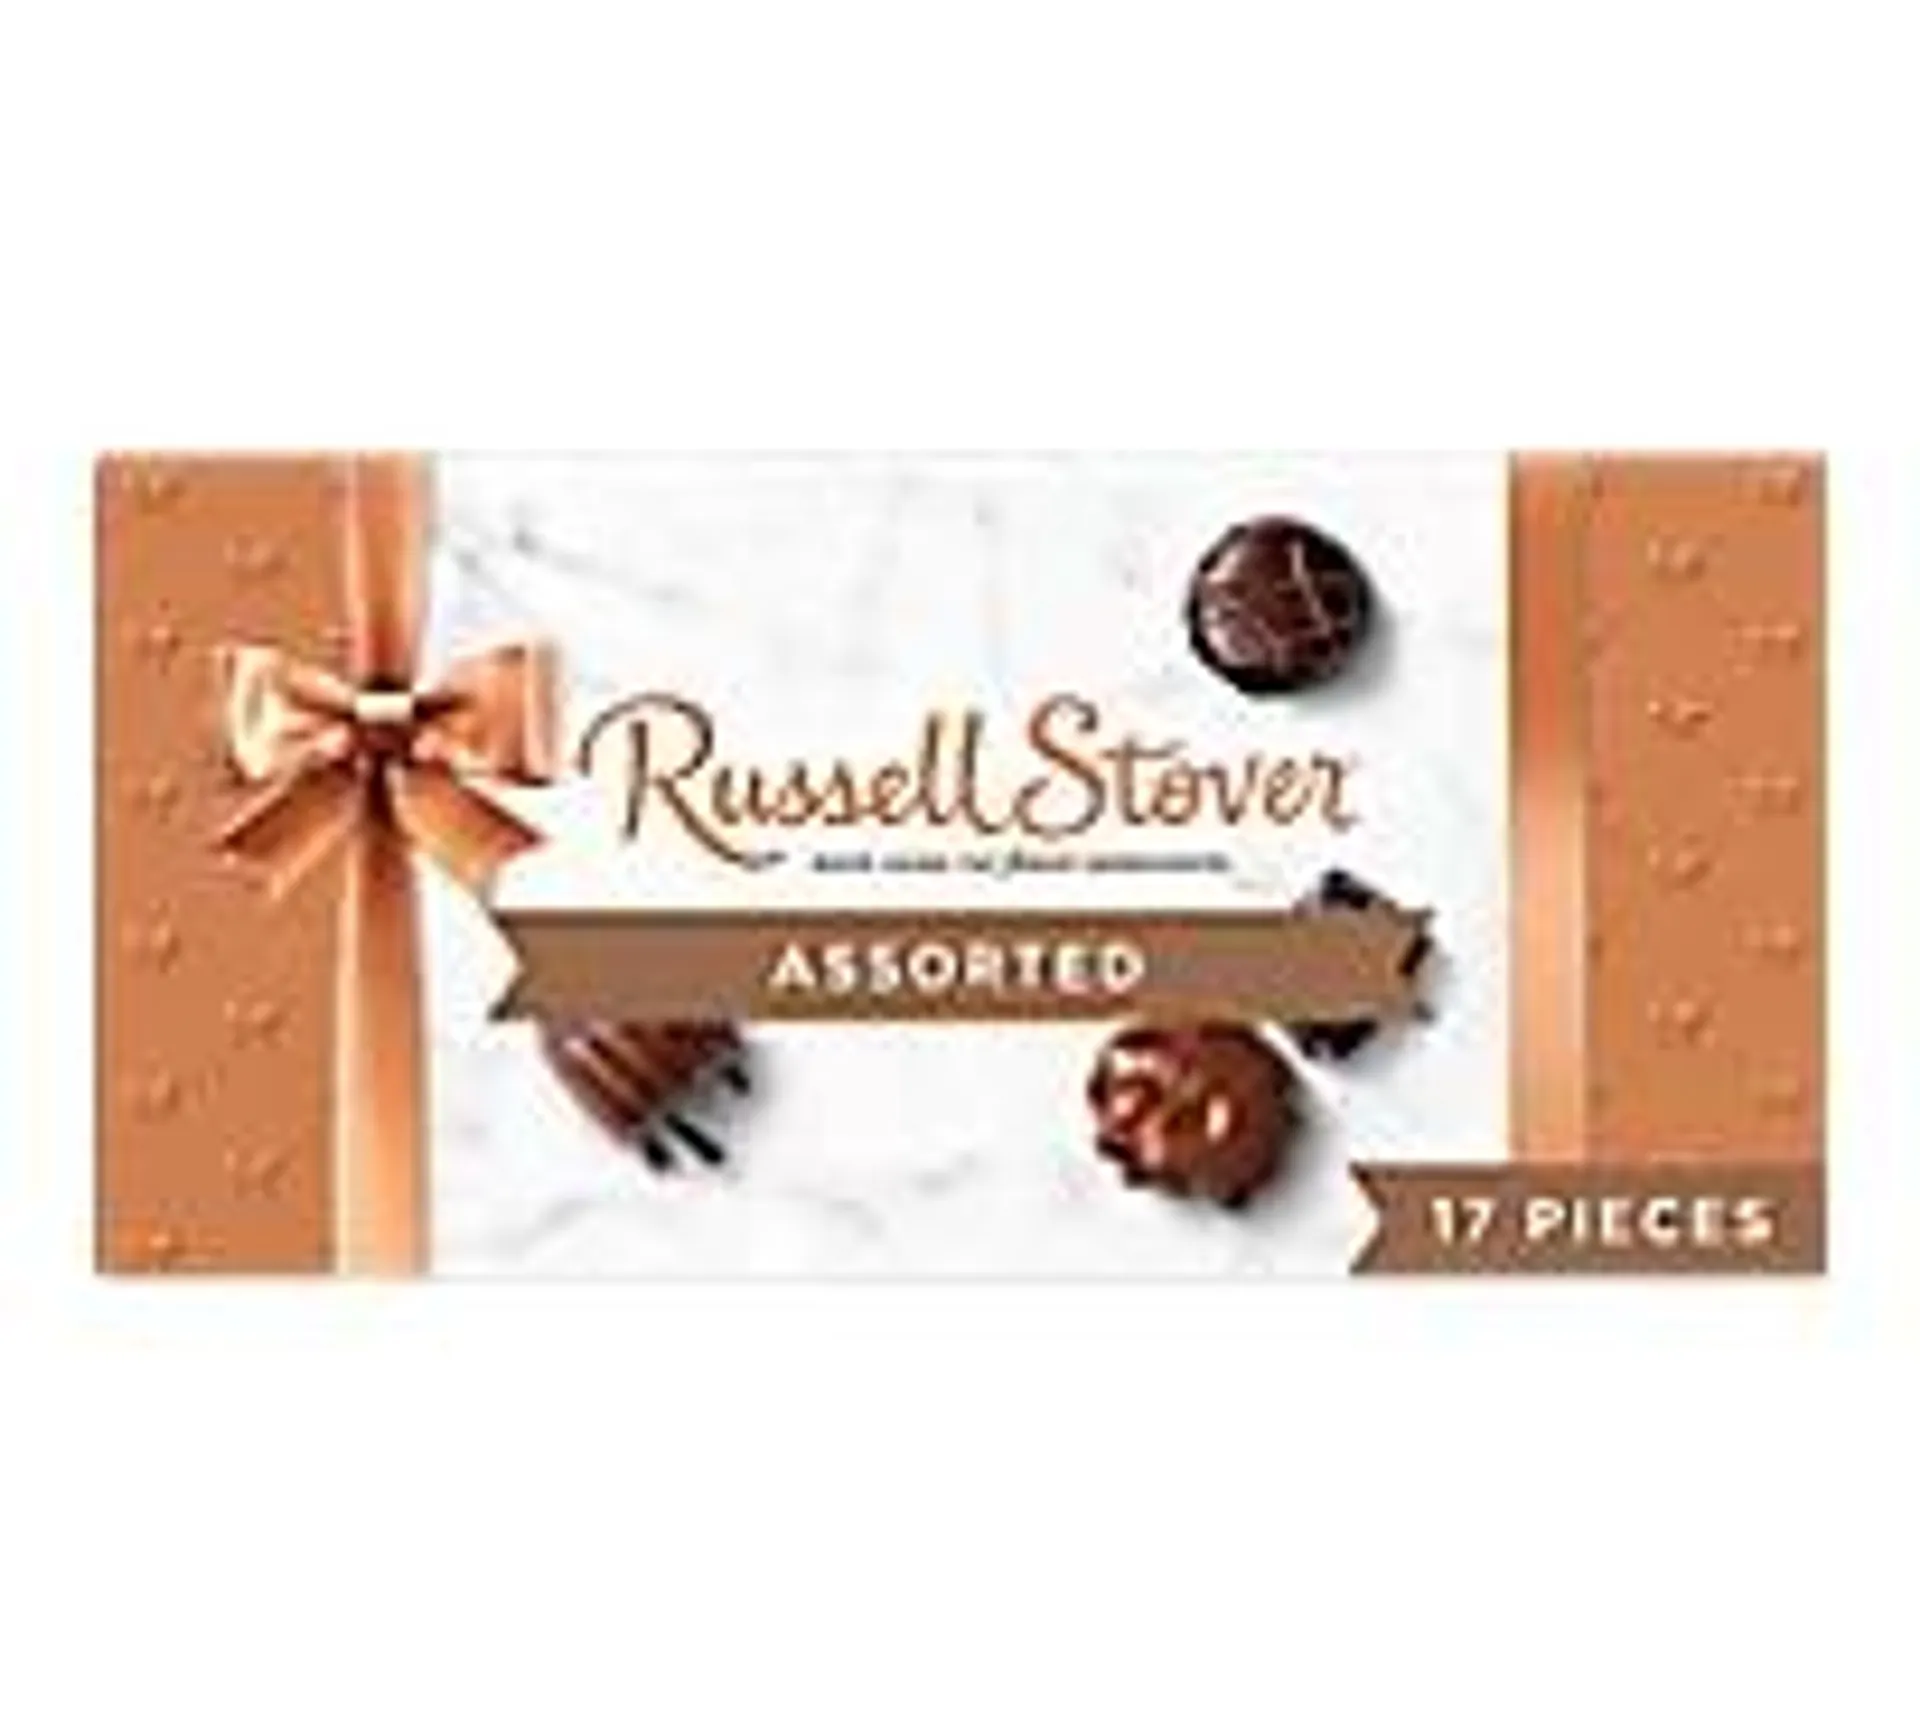 Russell Stover Assorted Milk &... te Gift Box - 9.4 Oz